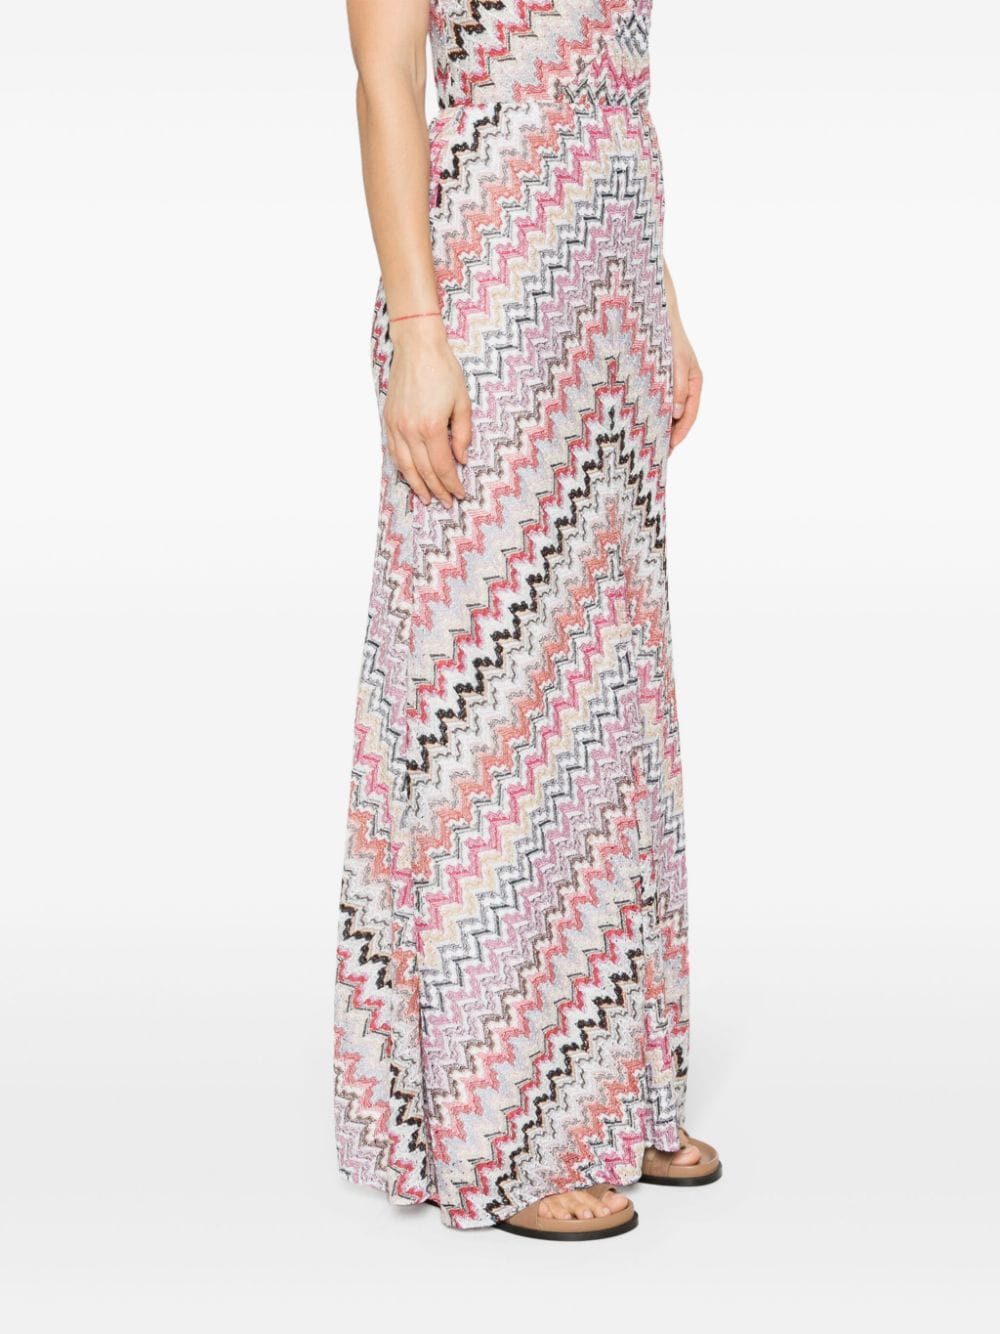 MISSONI Colorful Striped Skirt with Metallic Accents